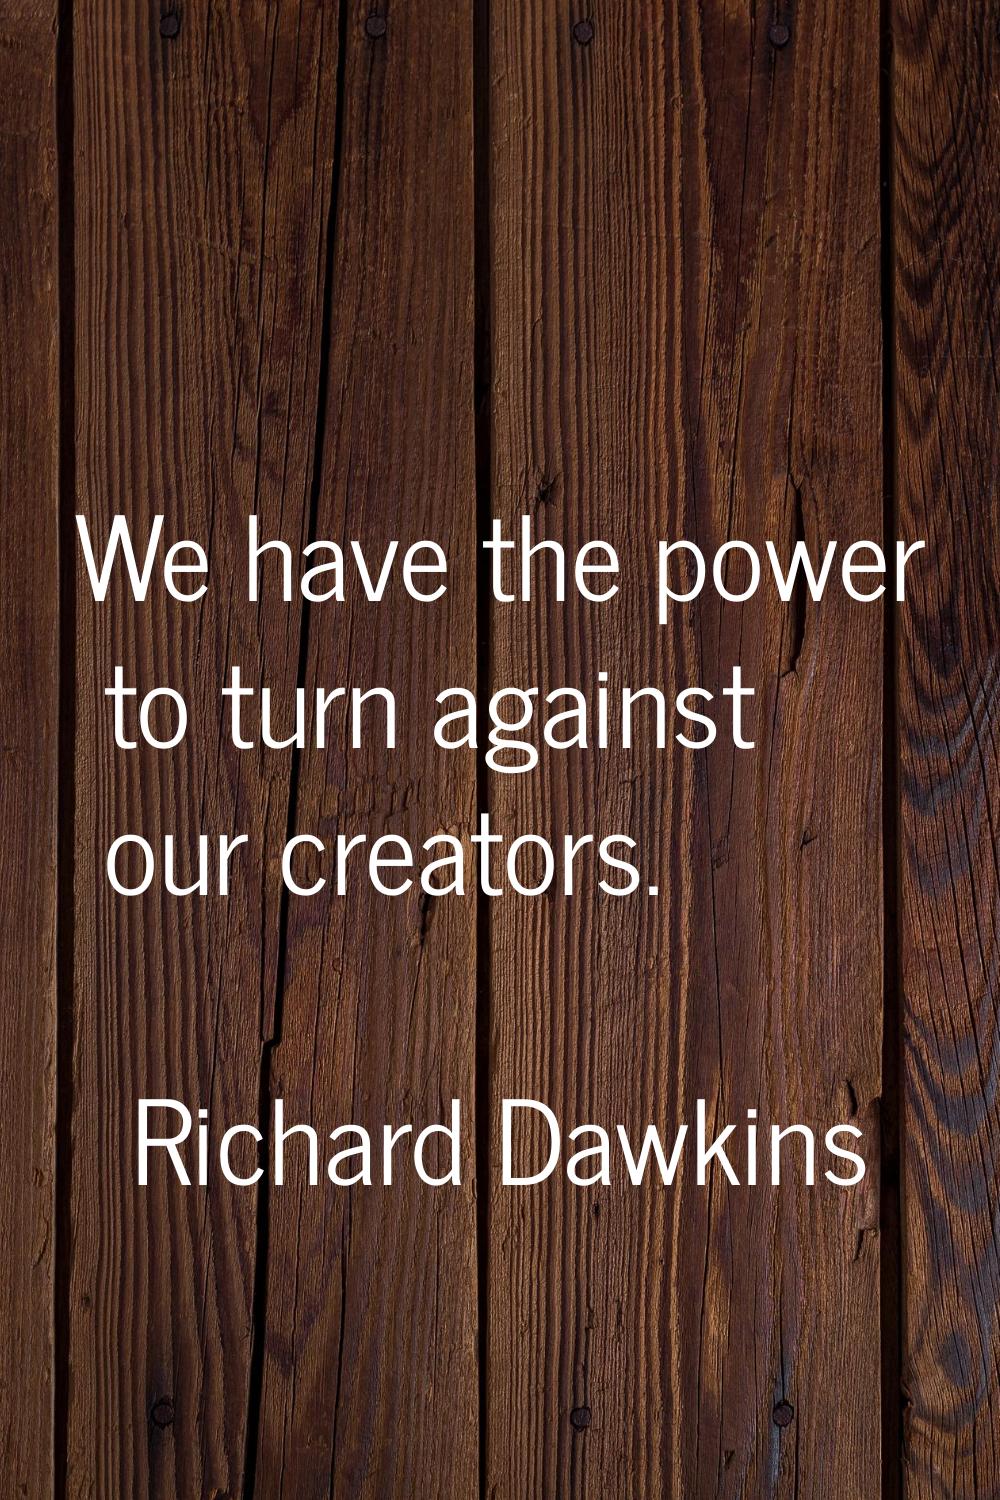 We have the power to turn against our creators.